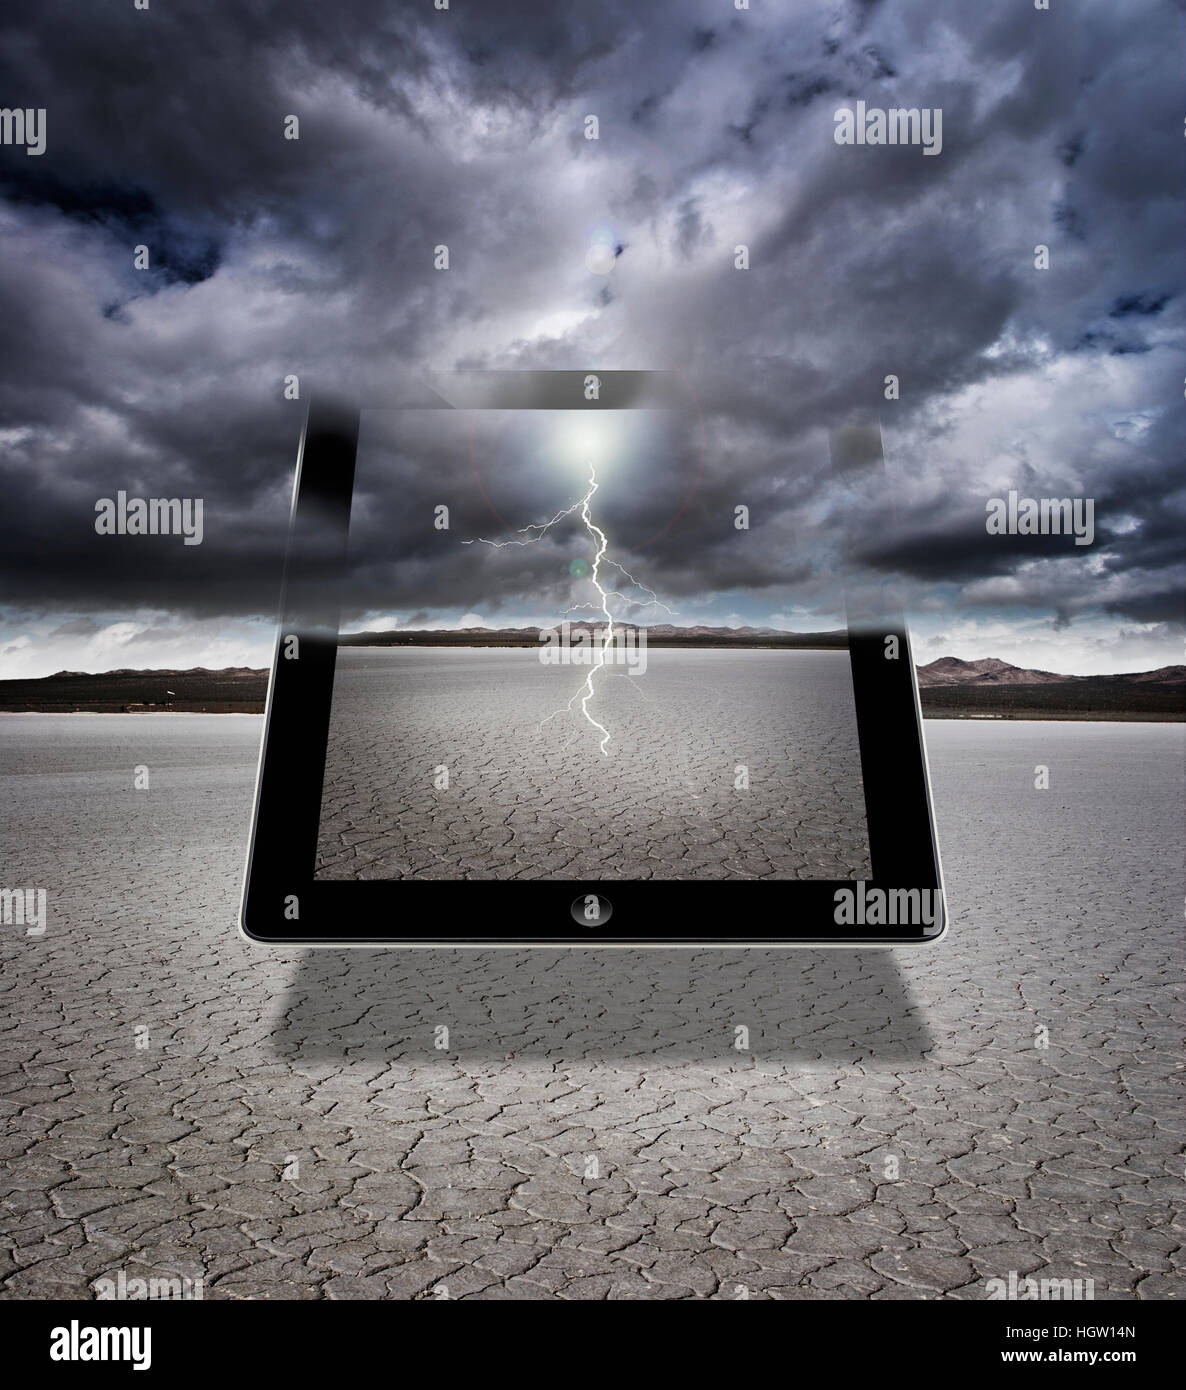 Composite Of A Digital Tablet With Storm Clouds And Lightning In A Dry Lakebed Stock Photo